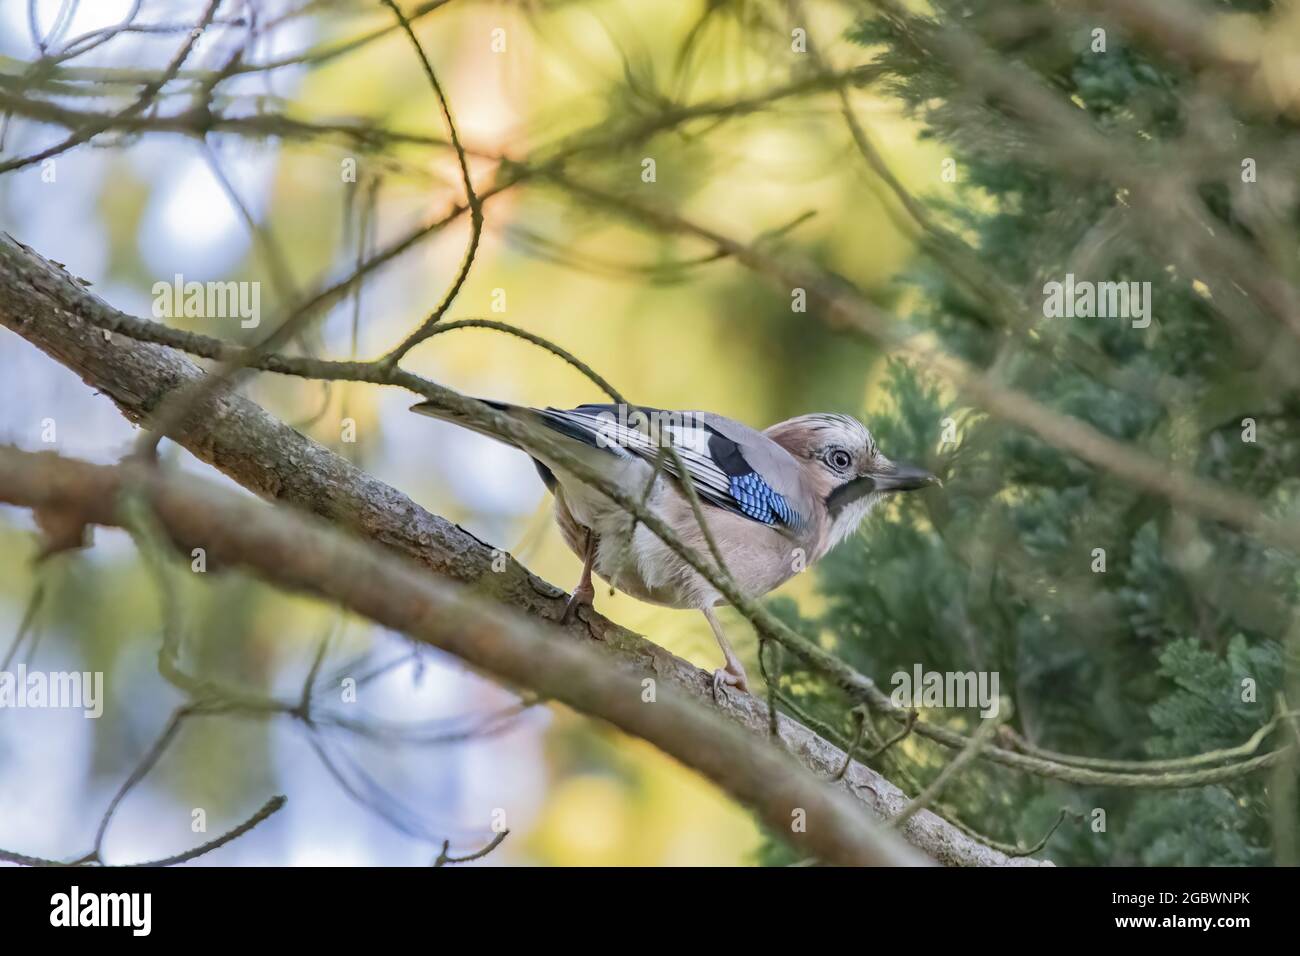 Closeup shot of a cute bird Blue Jay standing on the tree branch Stock Photo